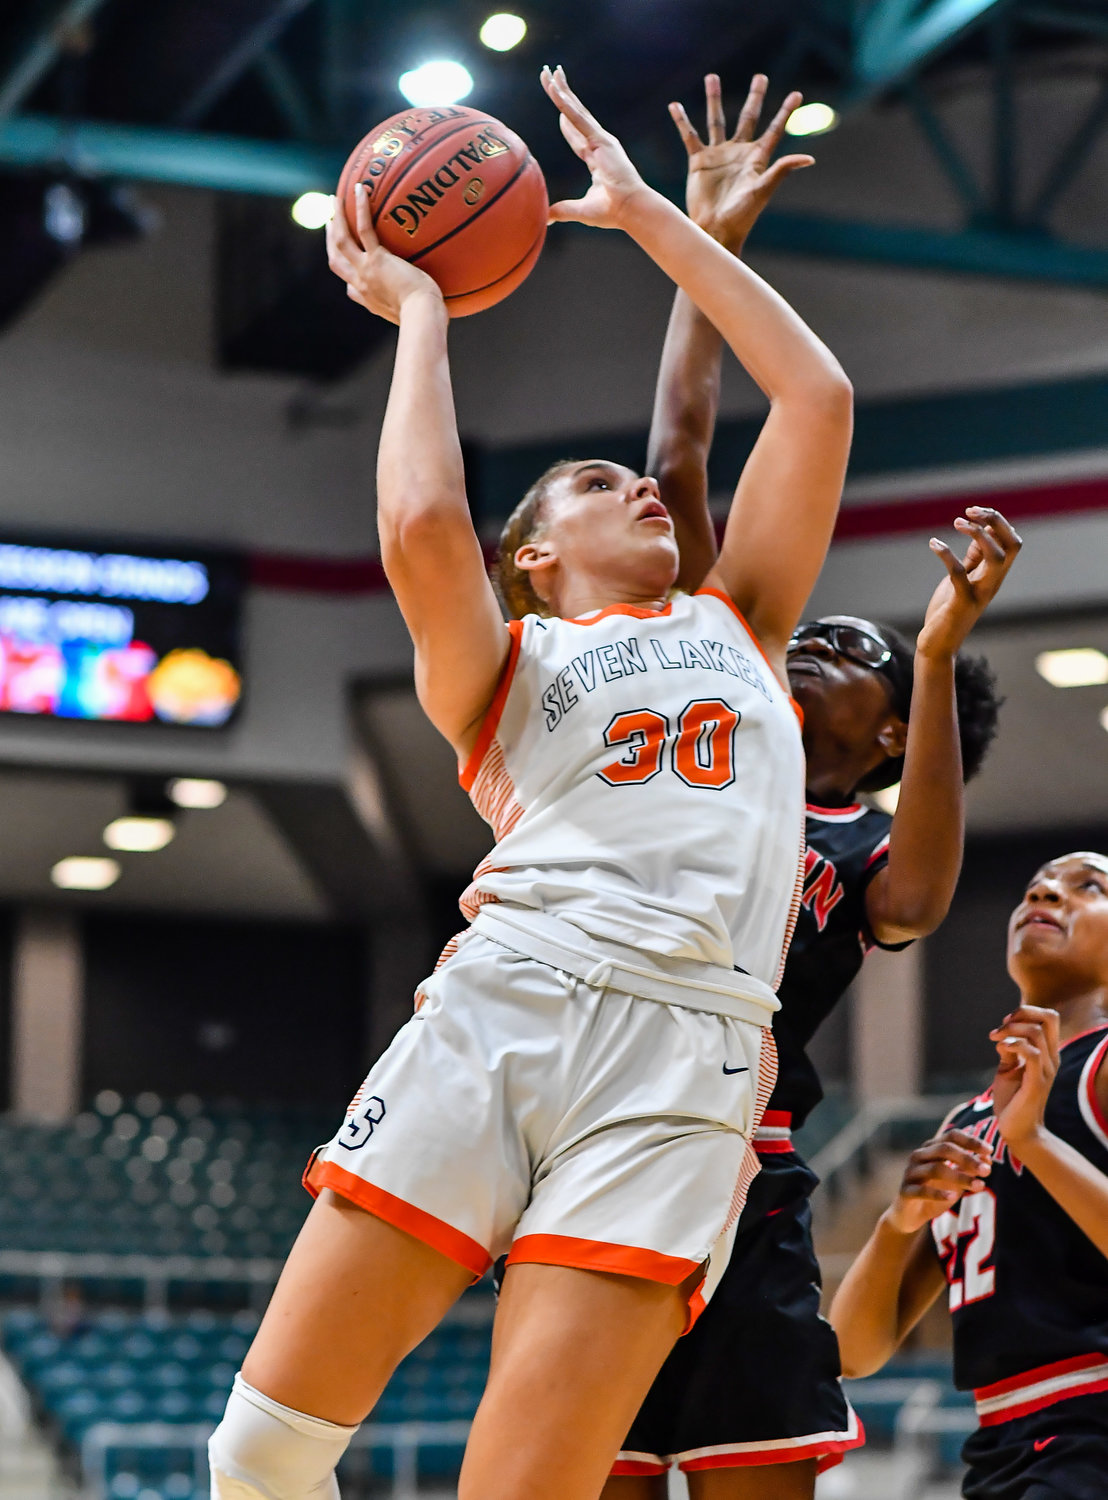 Katy Tx. Feb 22, 2022:  Seven Lakes Justice Carlton #30 drives to the basket scoring during the Regional Quarterfinal playoff game, Seven Lakes vs Fort Bend Austin at the Merrell Center. (Photo by Mark Goodman / Katy Times)